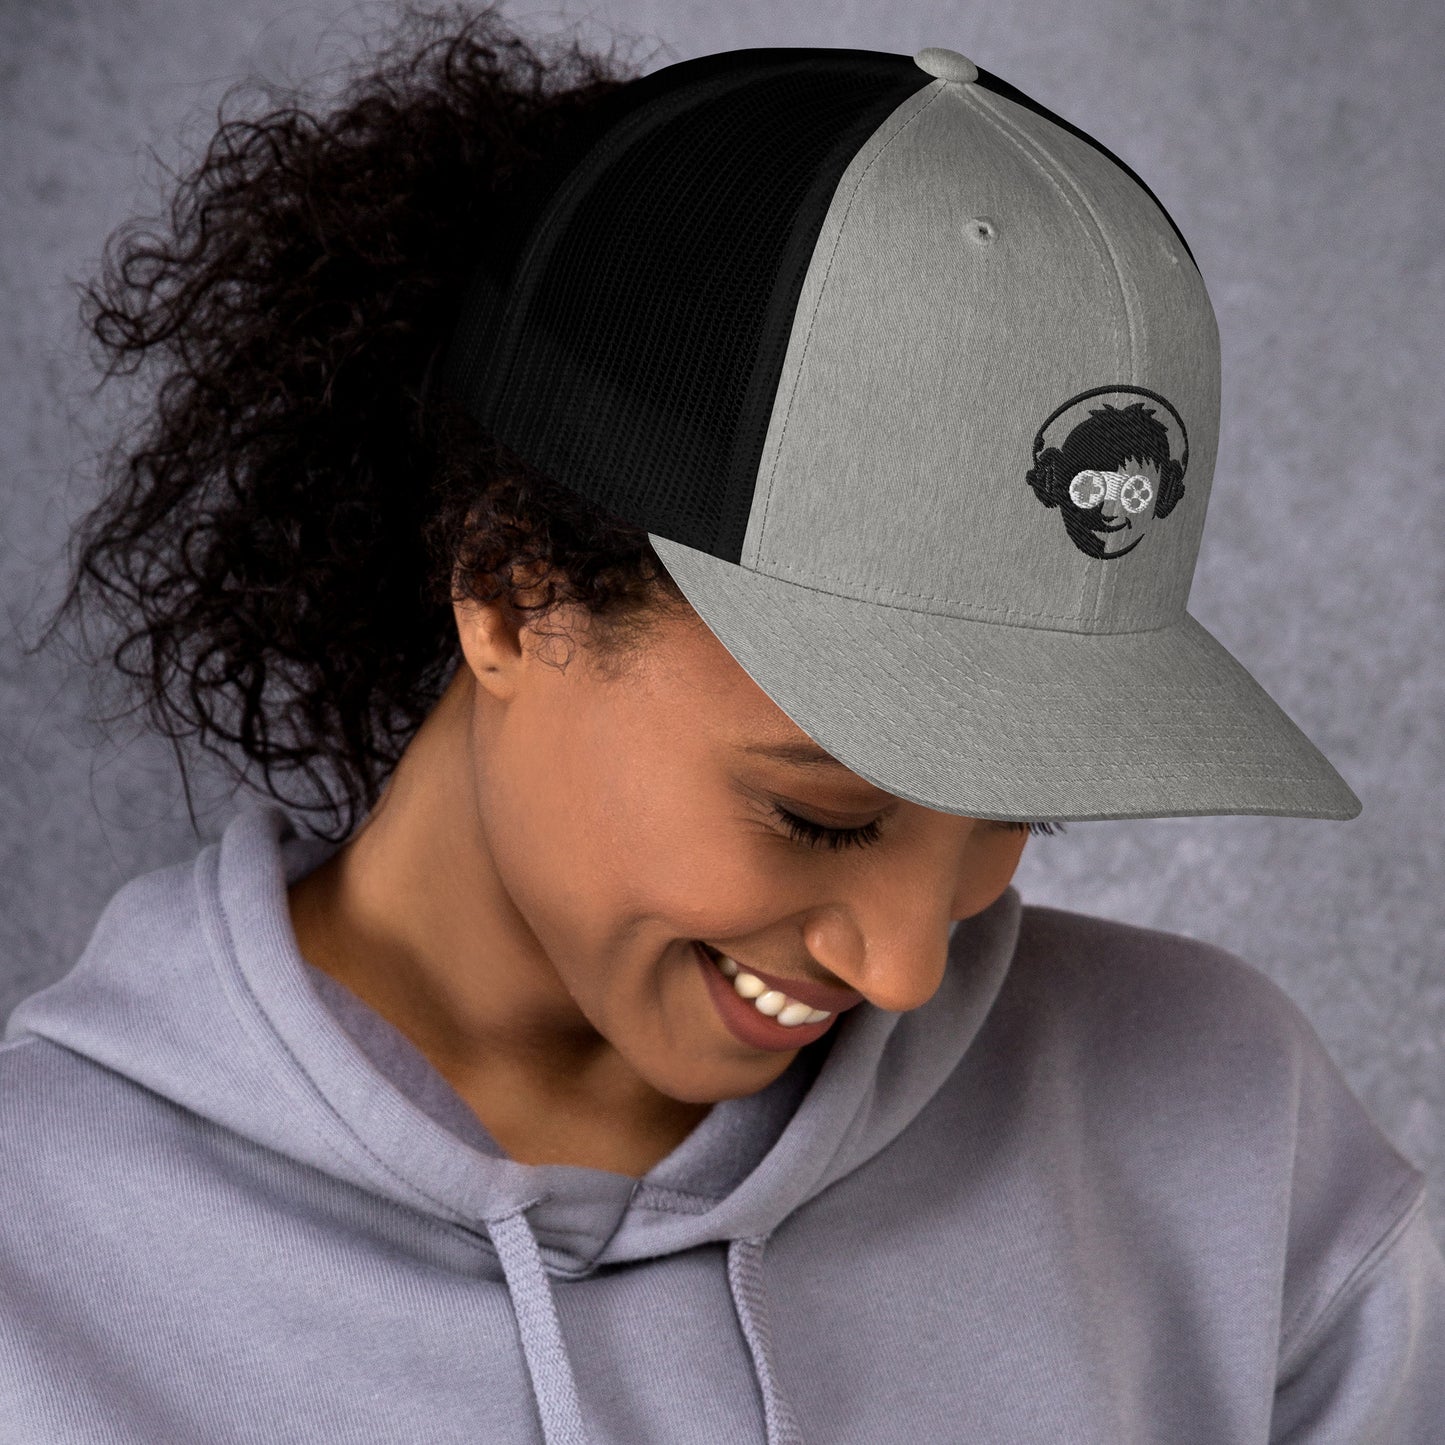 Gamer Cap in Heather / Grey - Perfect for the Gaming Geek